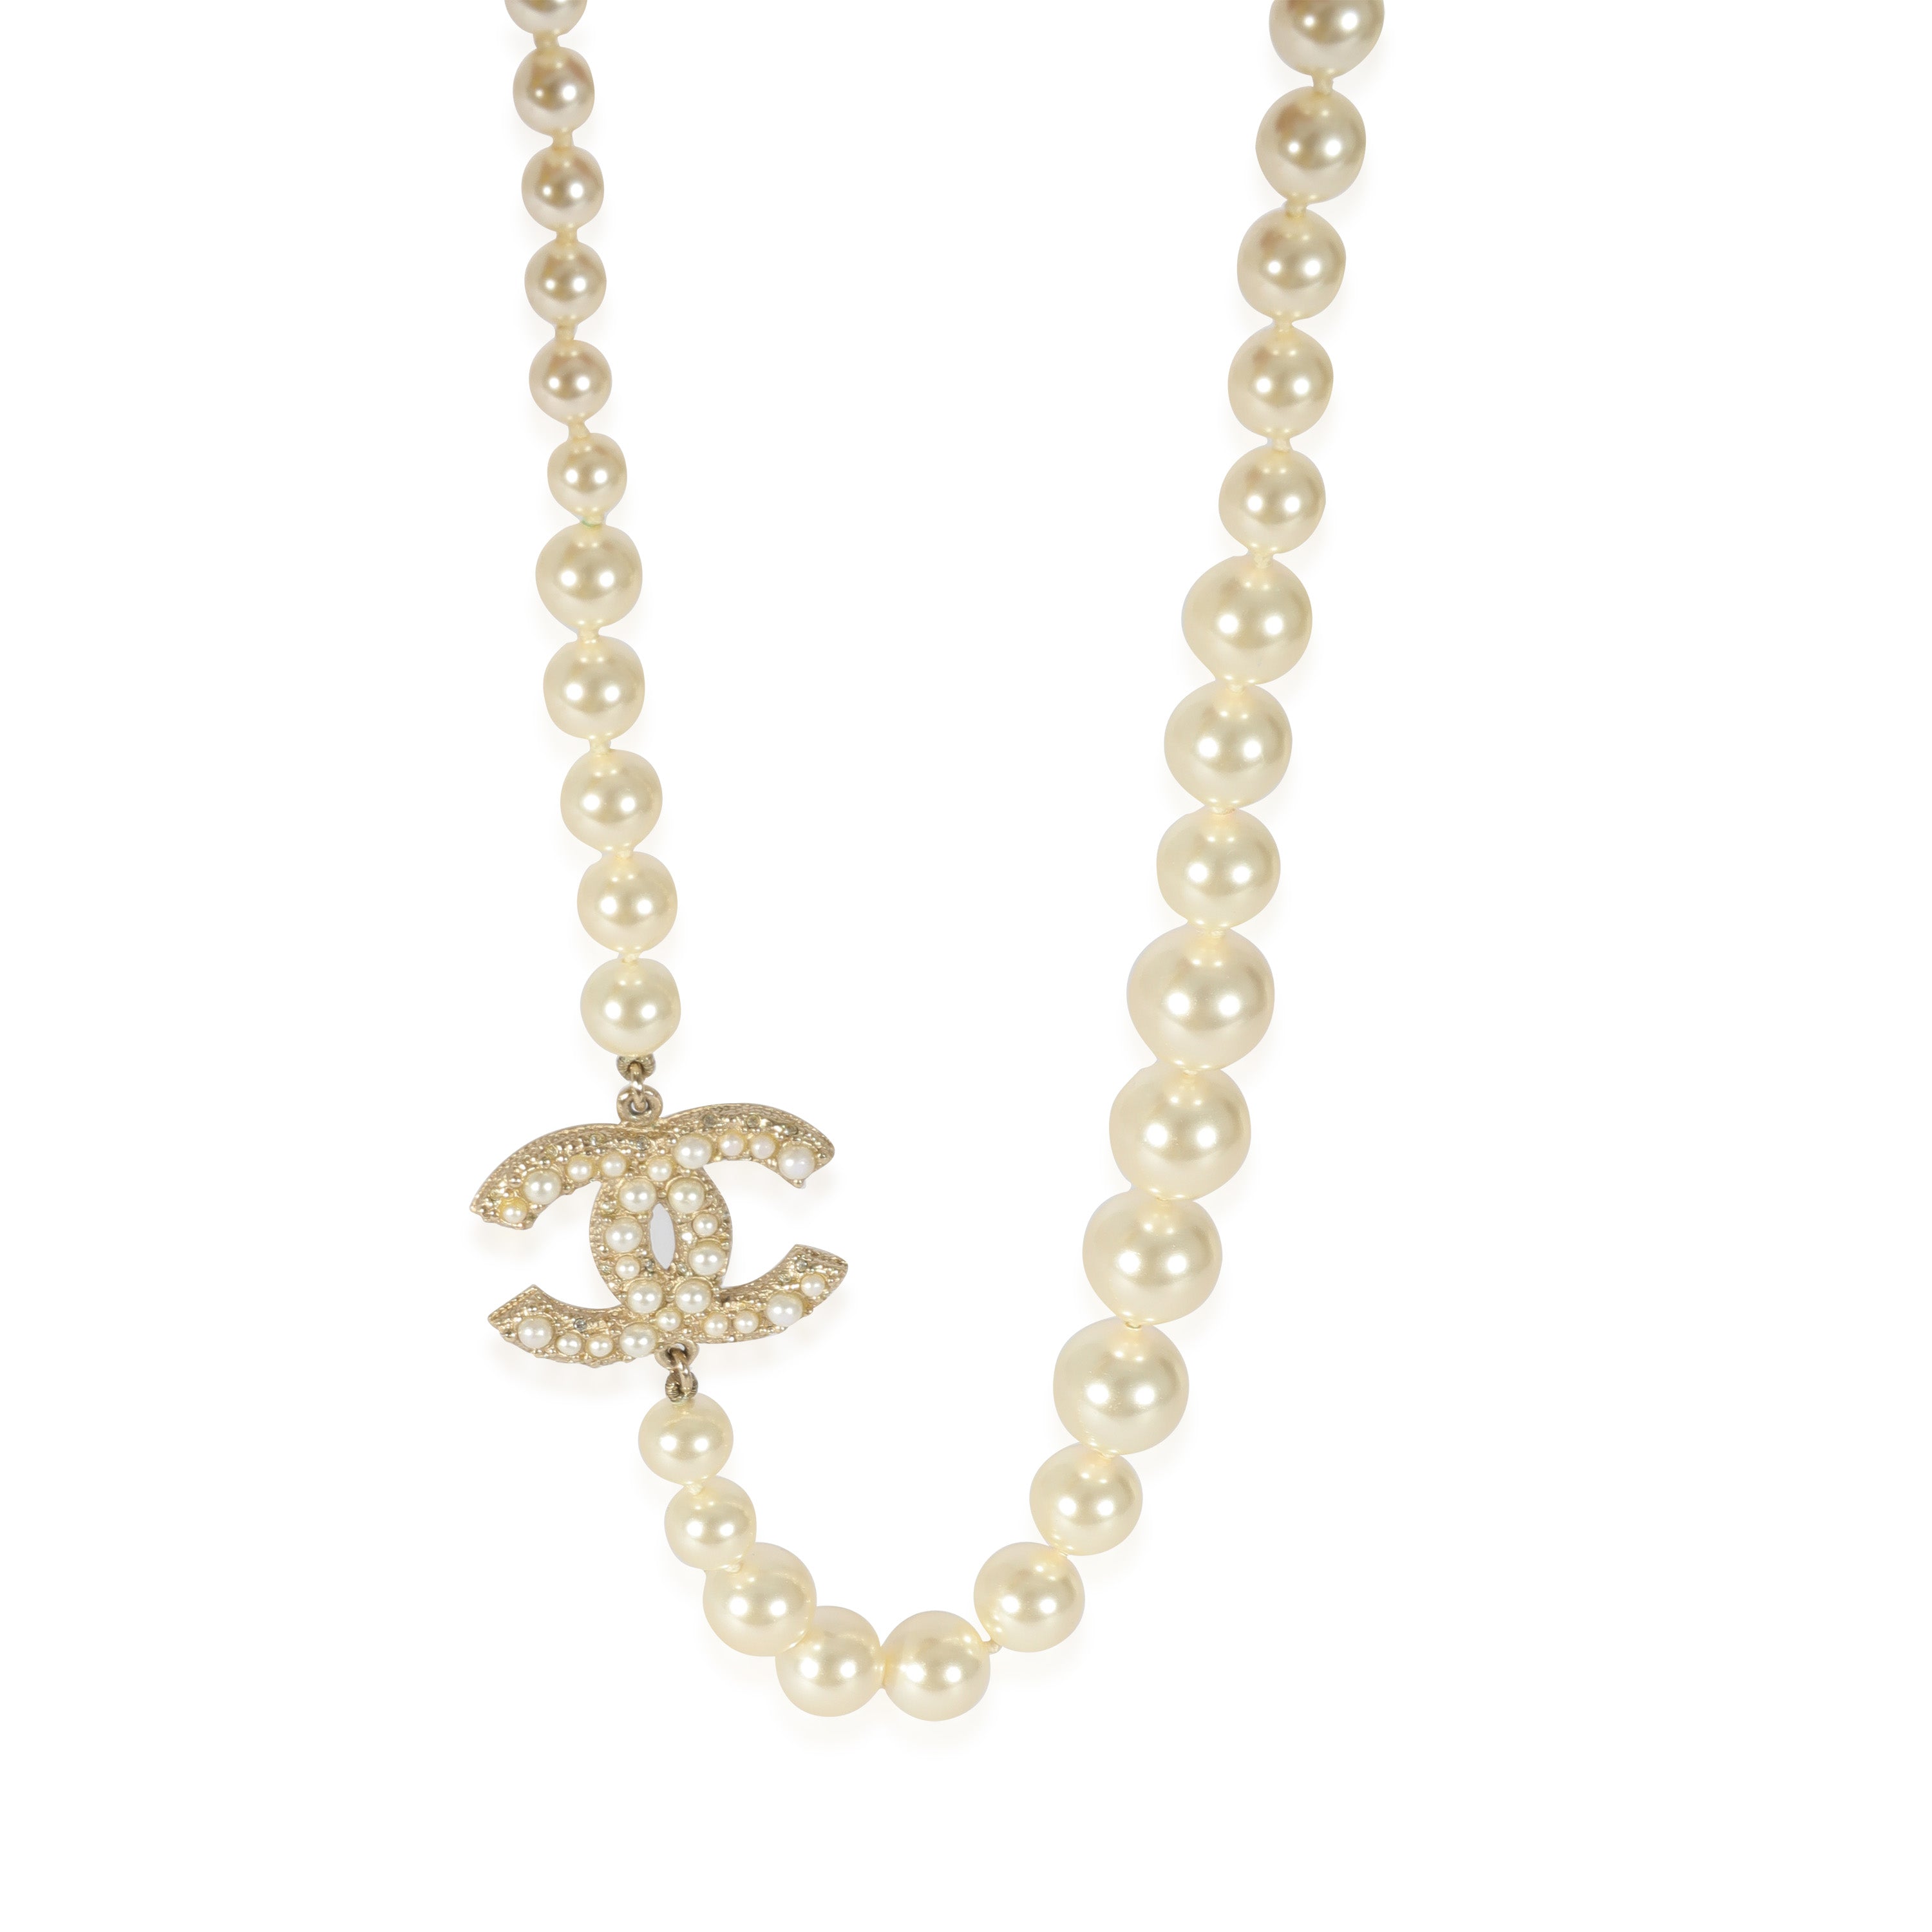 CHANEL WHITE PEARL LONG NECKLACE - Newness Bharain